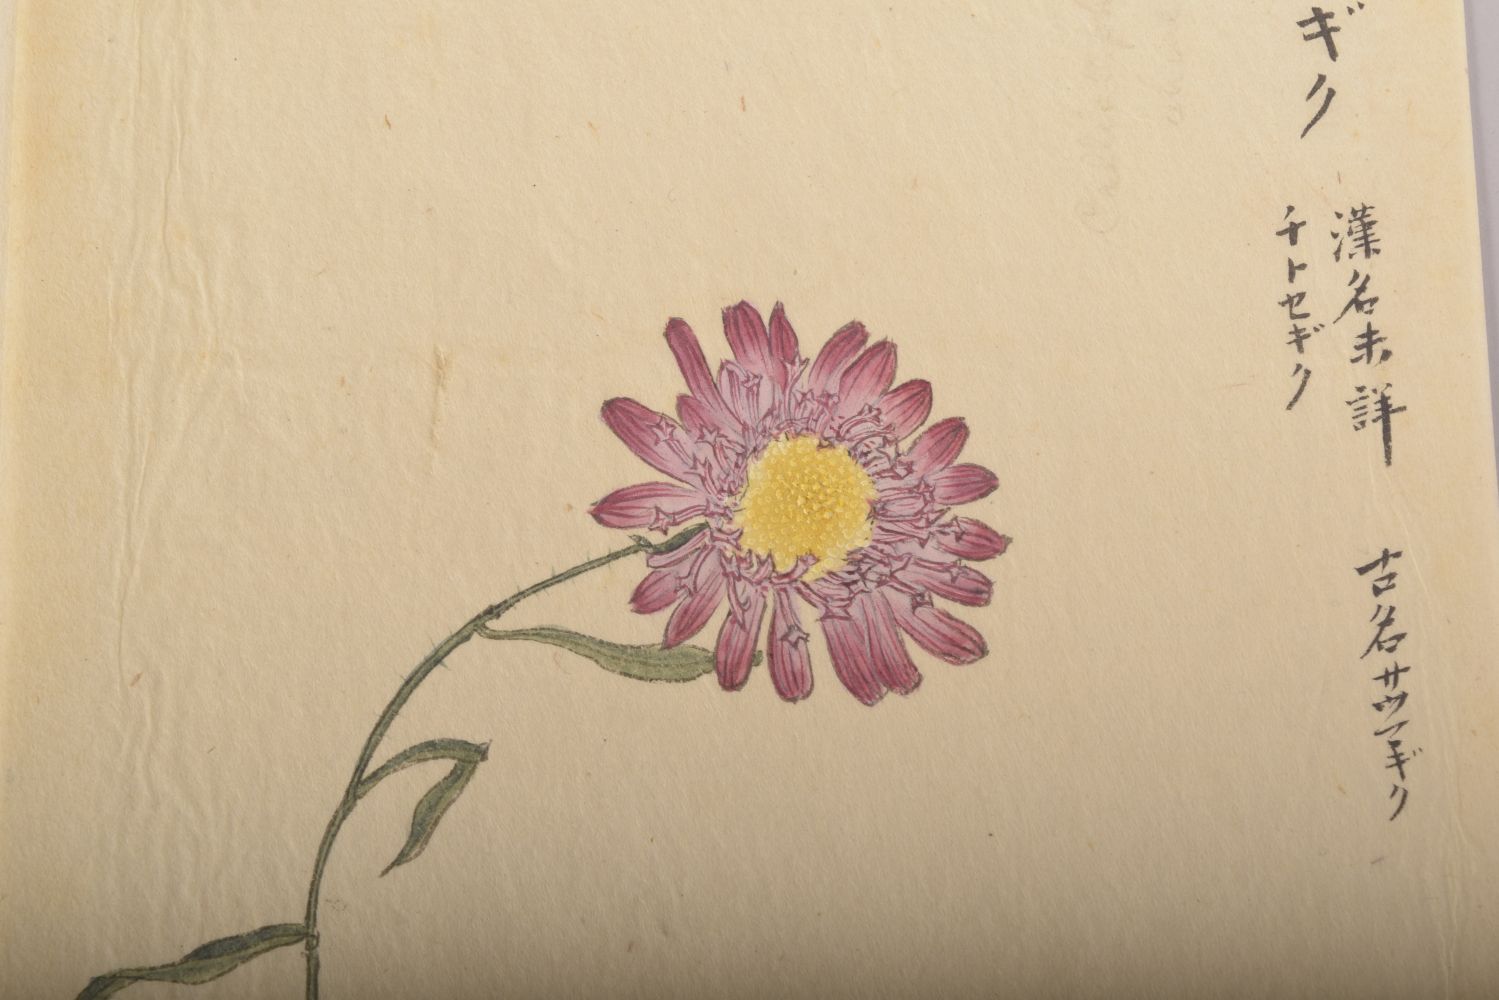 TWO JAPANESE MEIJI / TAISHO PAINTINGS OF FLOWERS ON PAPER, signed, image 27cm x 18cm and 28cm x 18. - Image 2 of 10